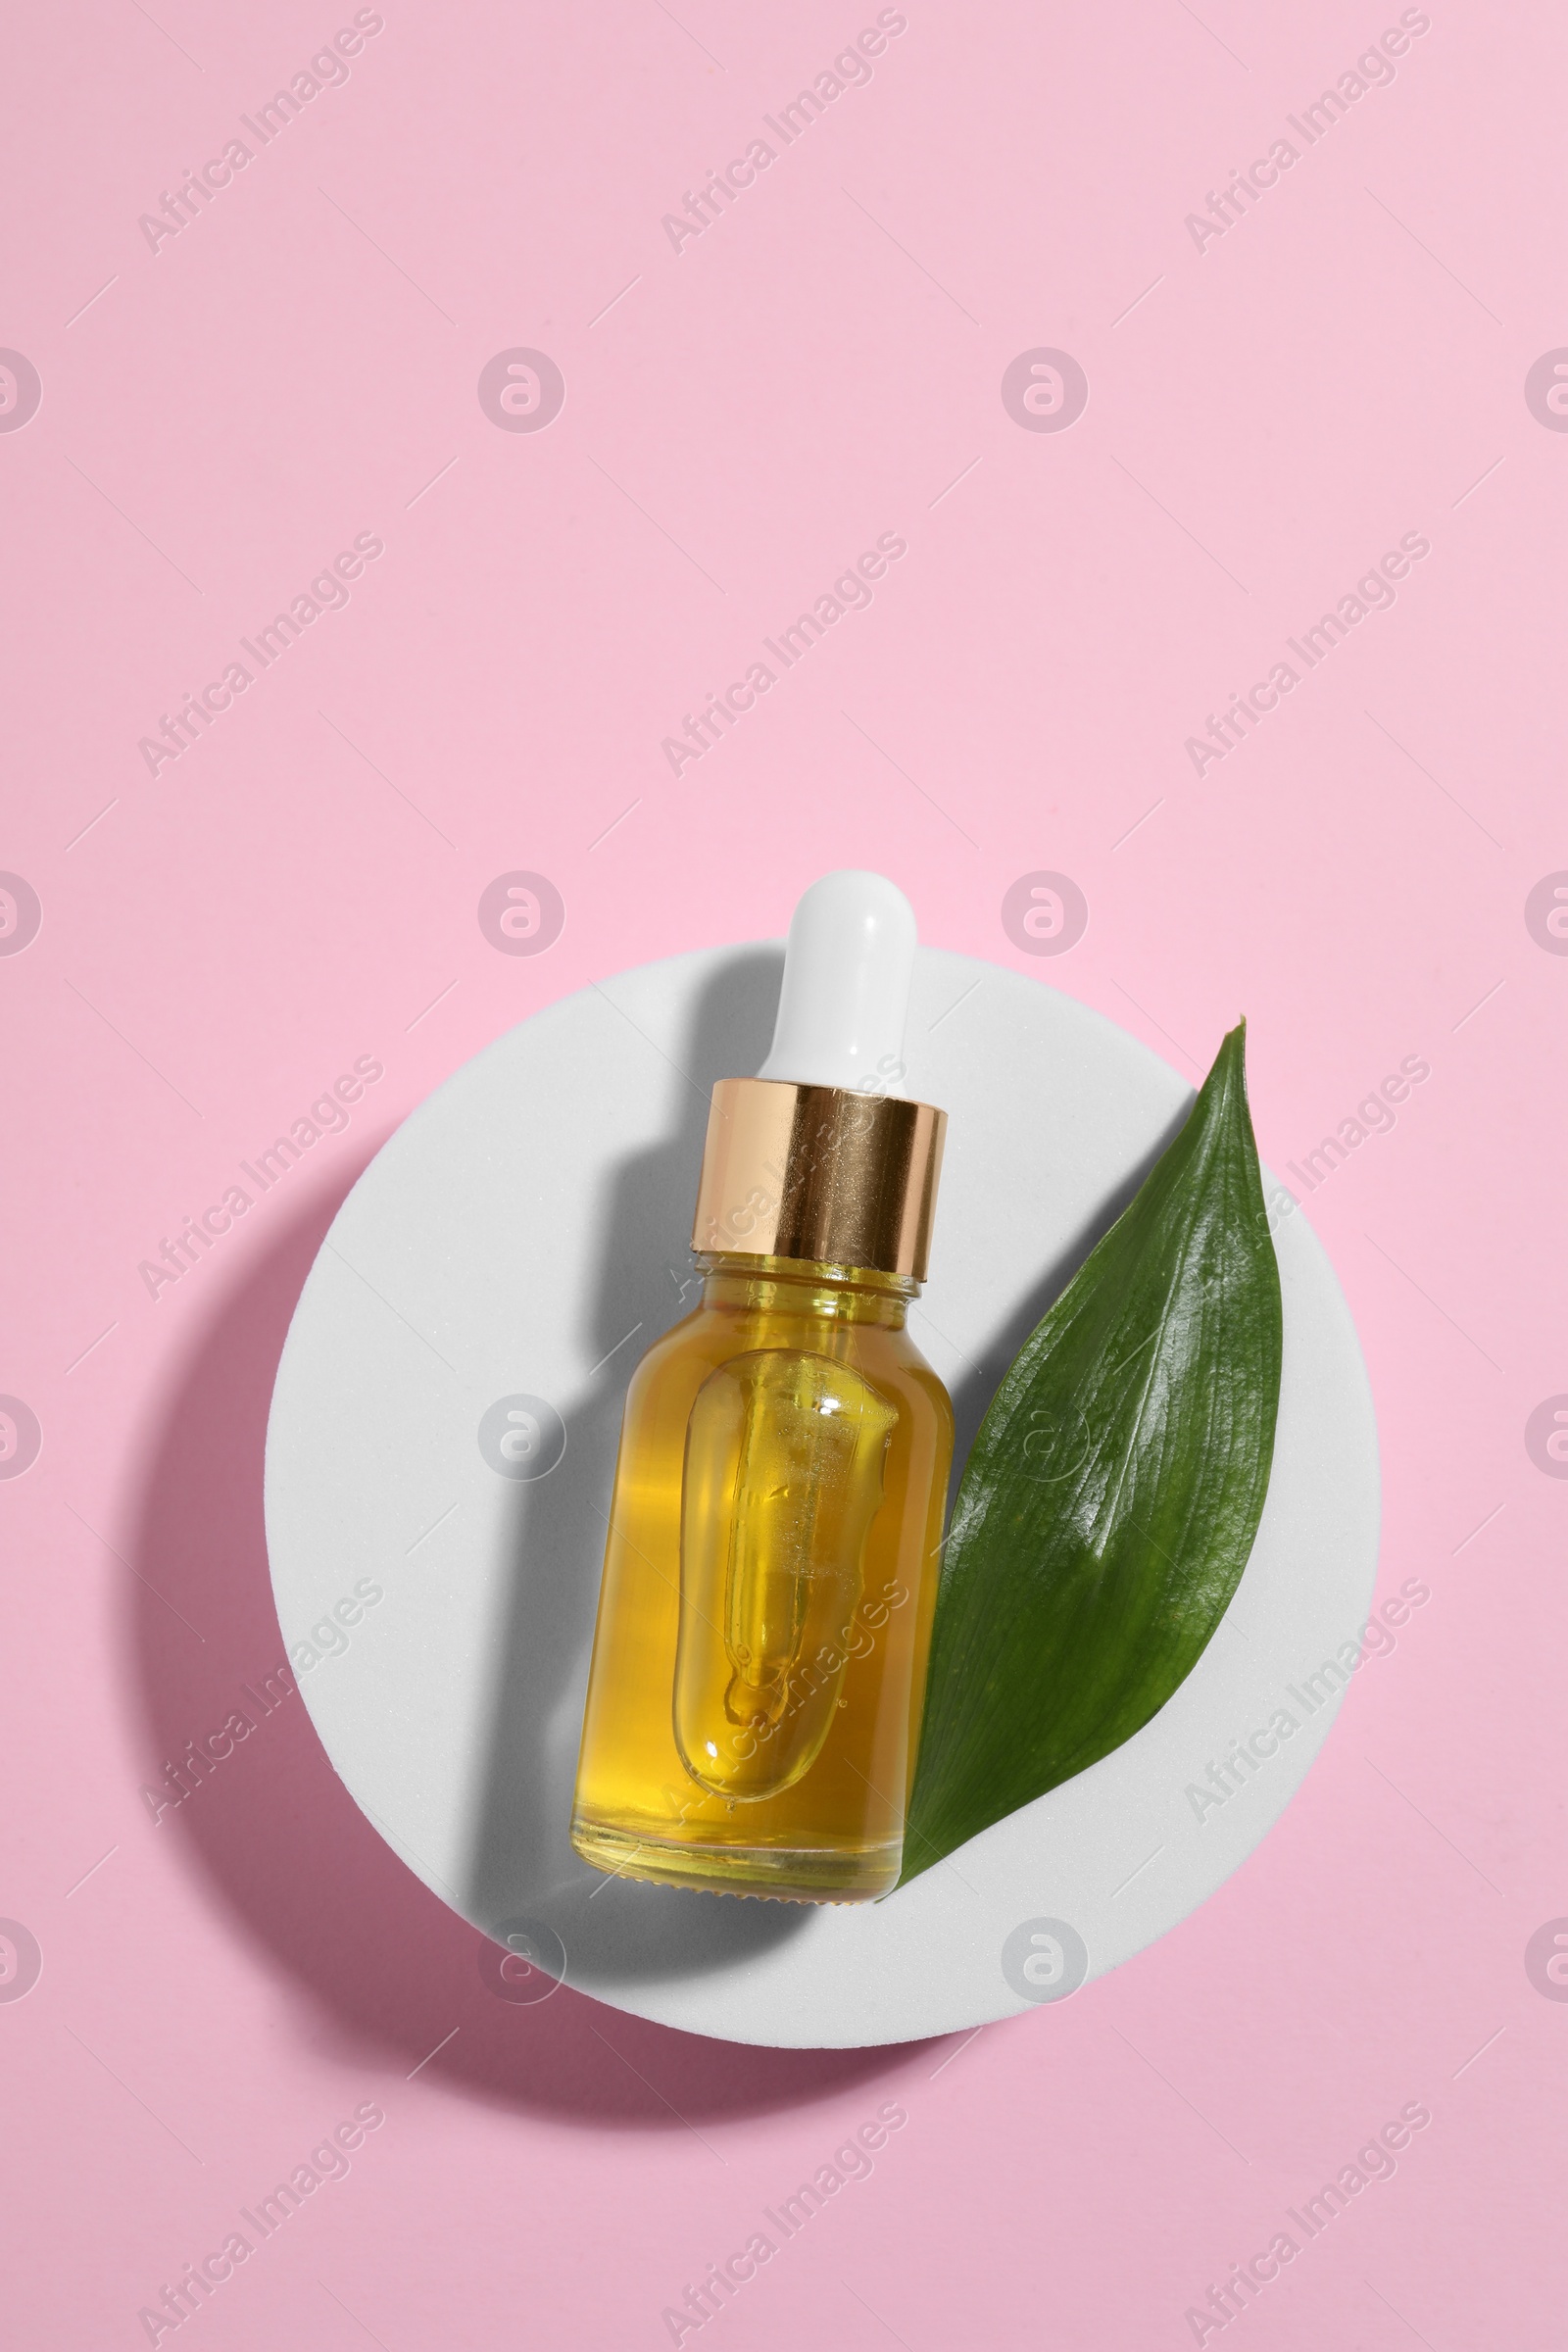 Photo of Bottle of cosmetic oil and green leaf on pink background, top view